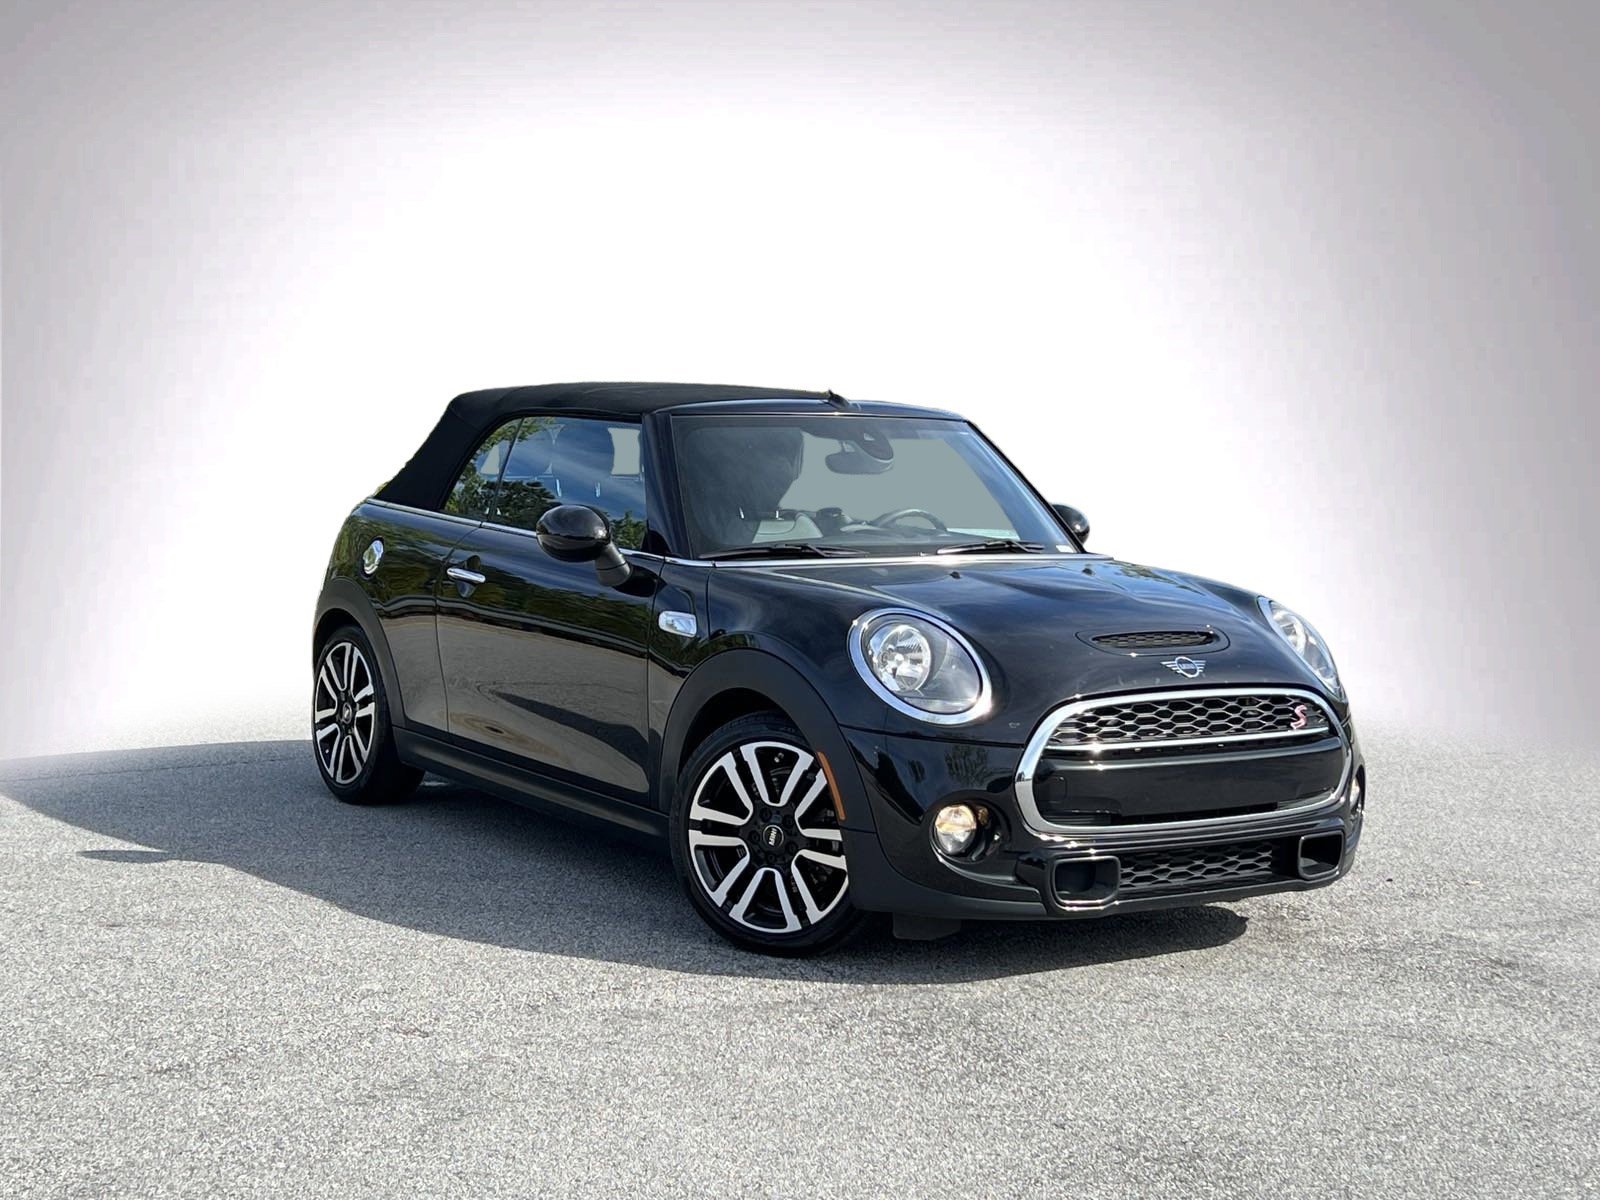 Pre-Owned 2019 MINI Convertible Cooper S Convertible in Merriam #Q23949A |  Hendrick Chevrolet Shawnee Mission